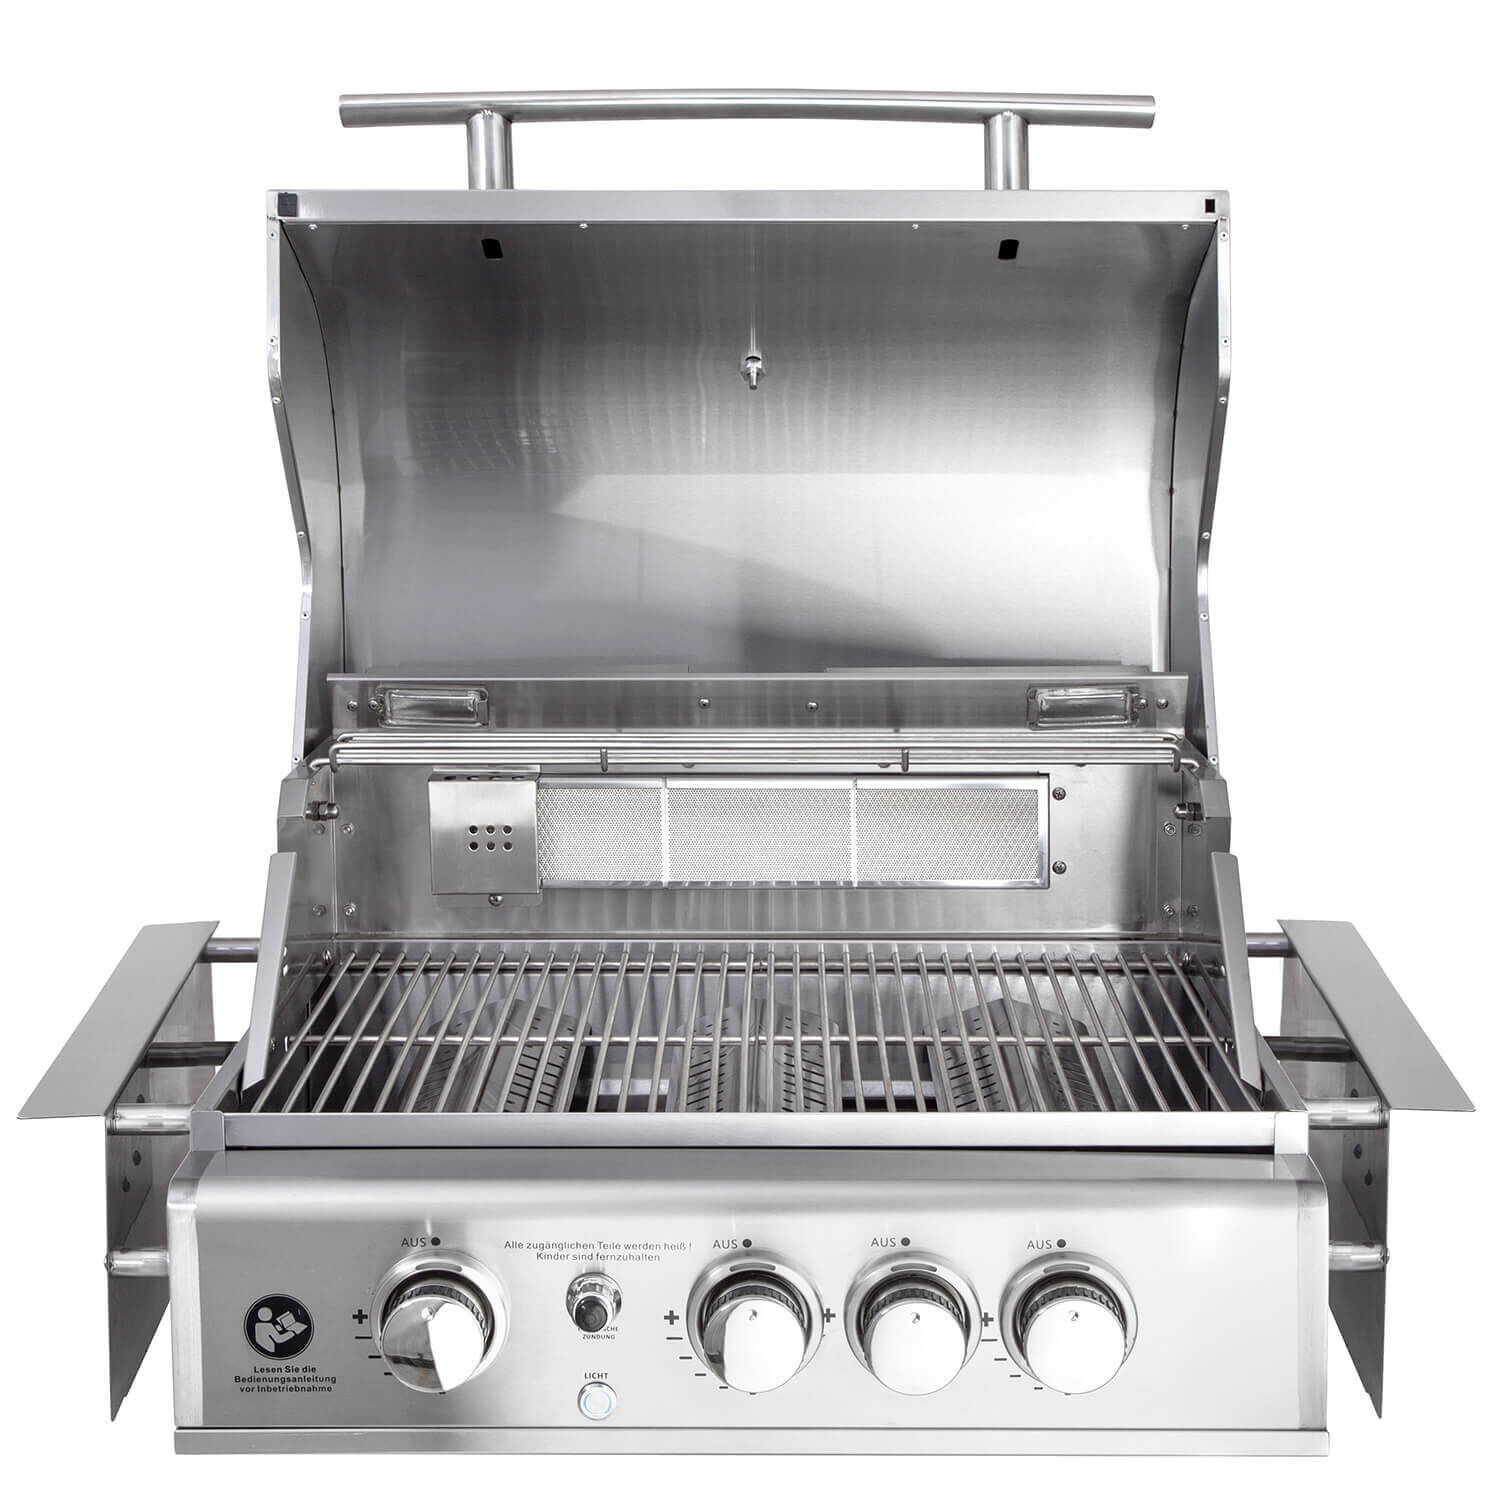 ALL'GRILL TOP-LINE - ALL'GRILL CHEF "M" - BUILT-IN mit Air System 100949